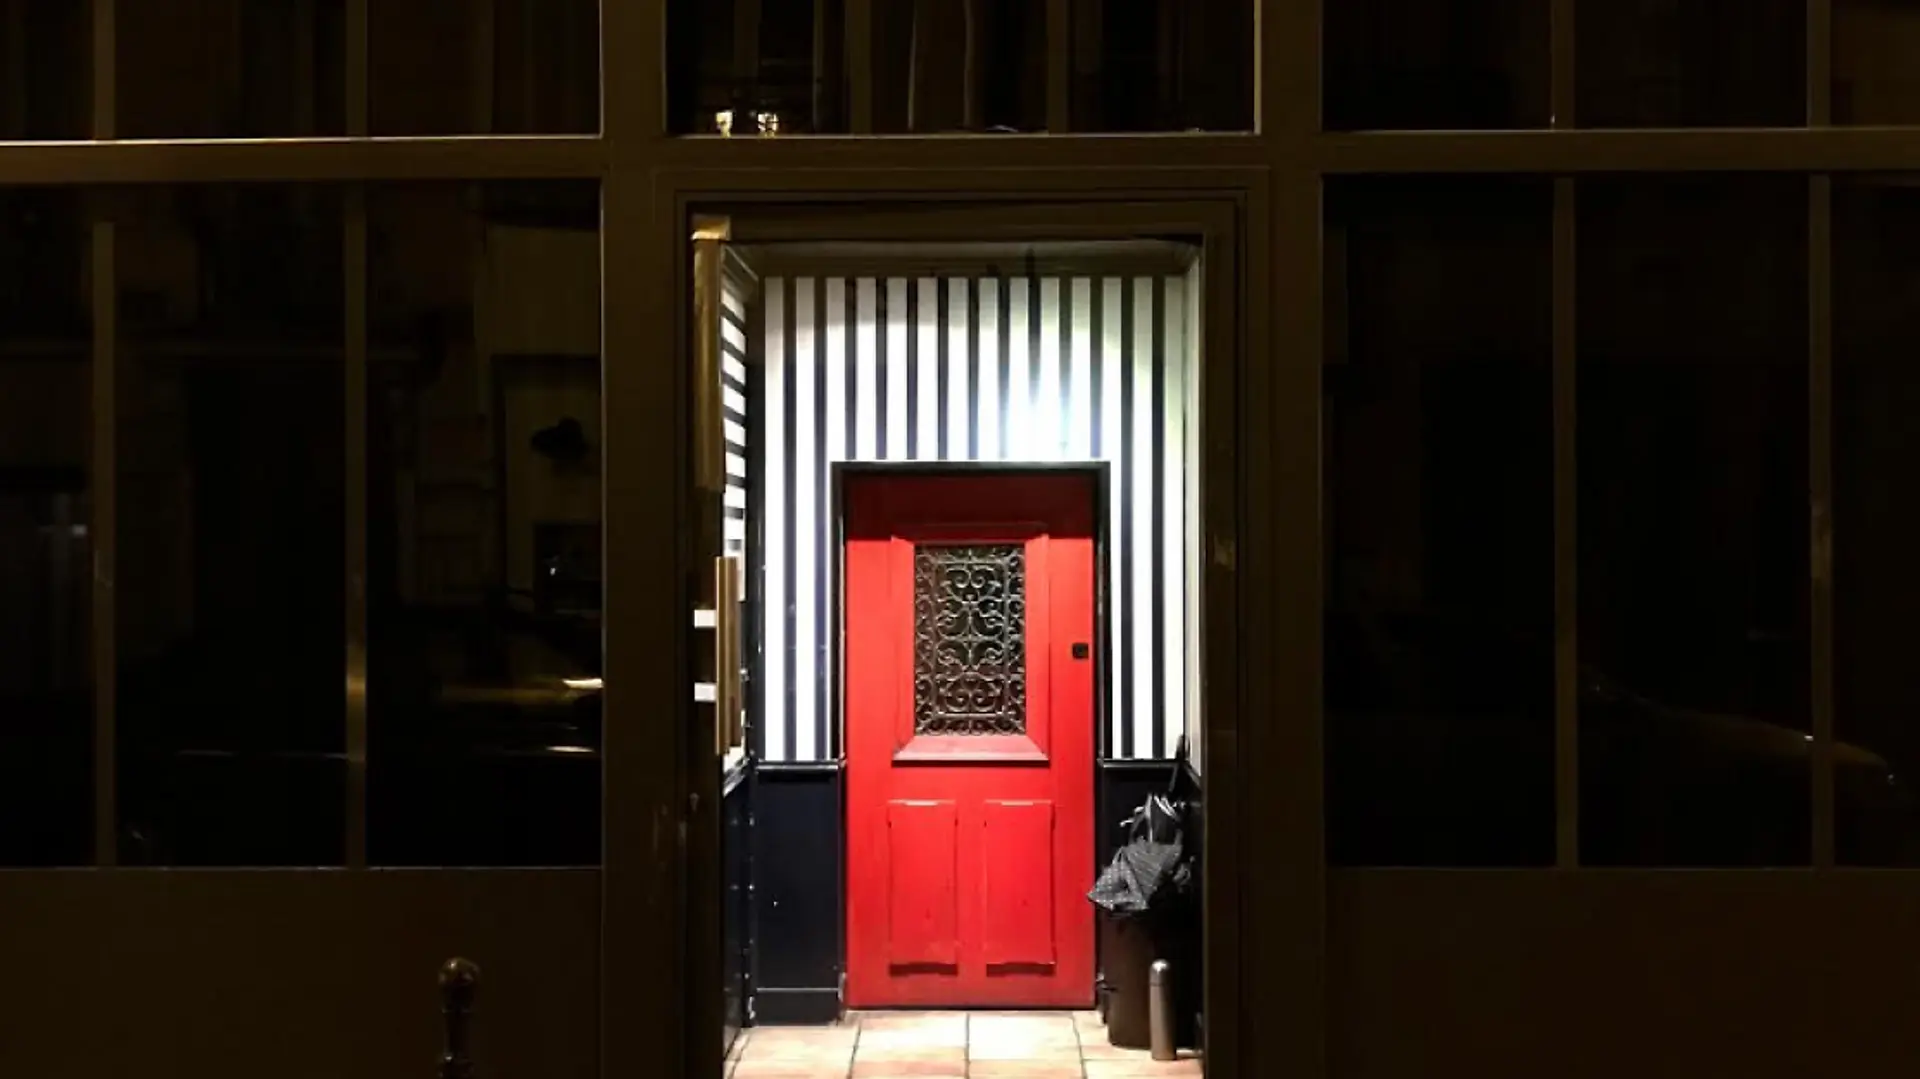 Black walls and a small way in to a small little red door.